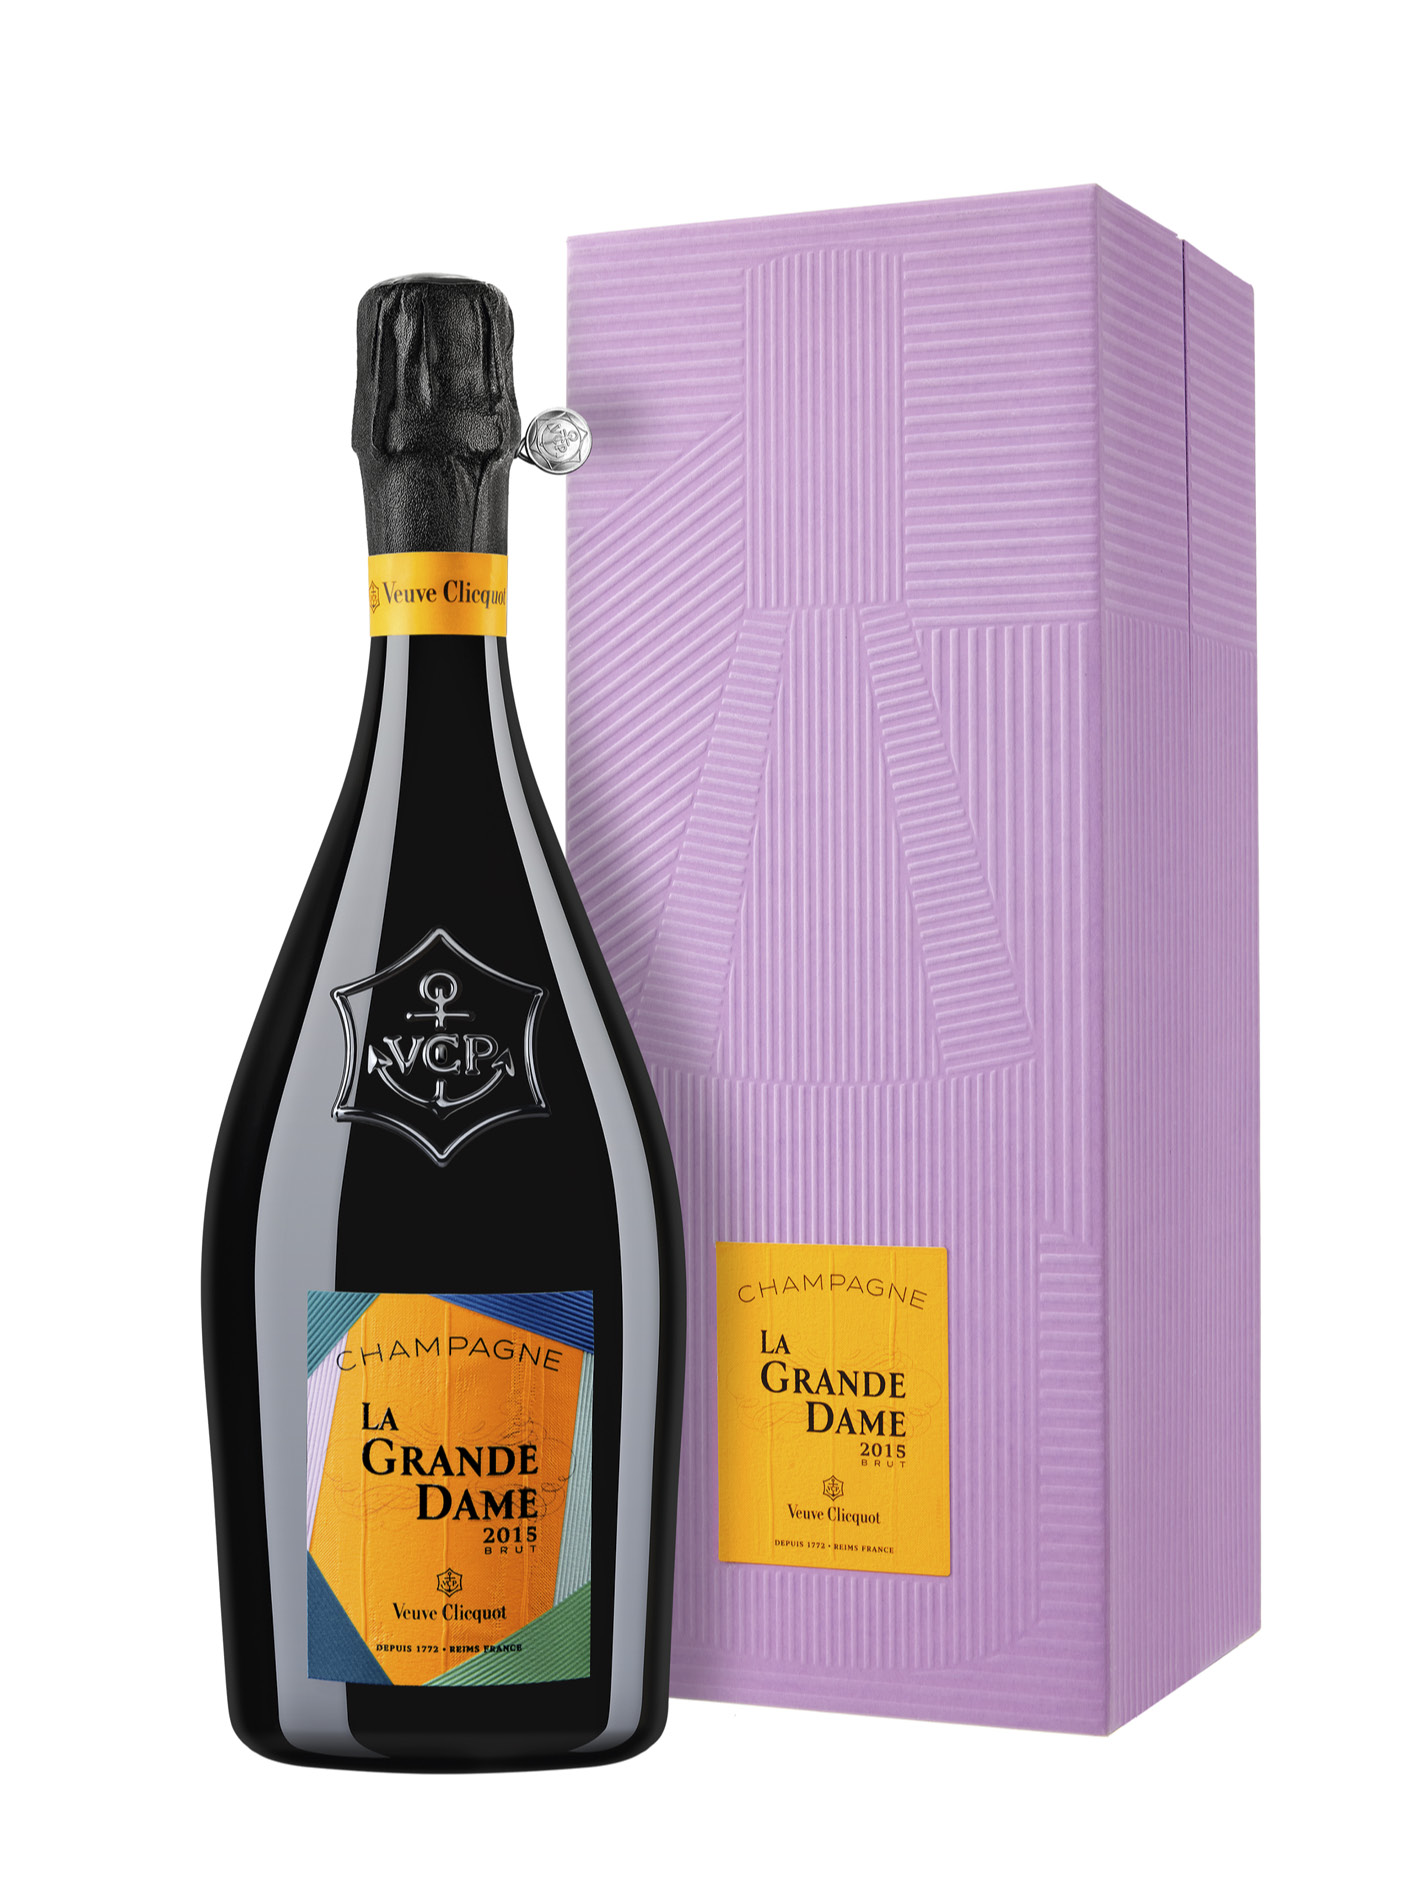 Italian ceramist Paola Paronetto designed the packaging and bottle, inspired by the joyful spirit of La Grand Dame 2015